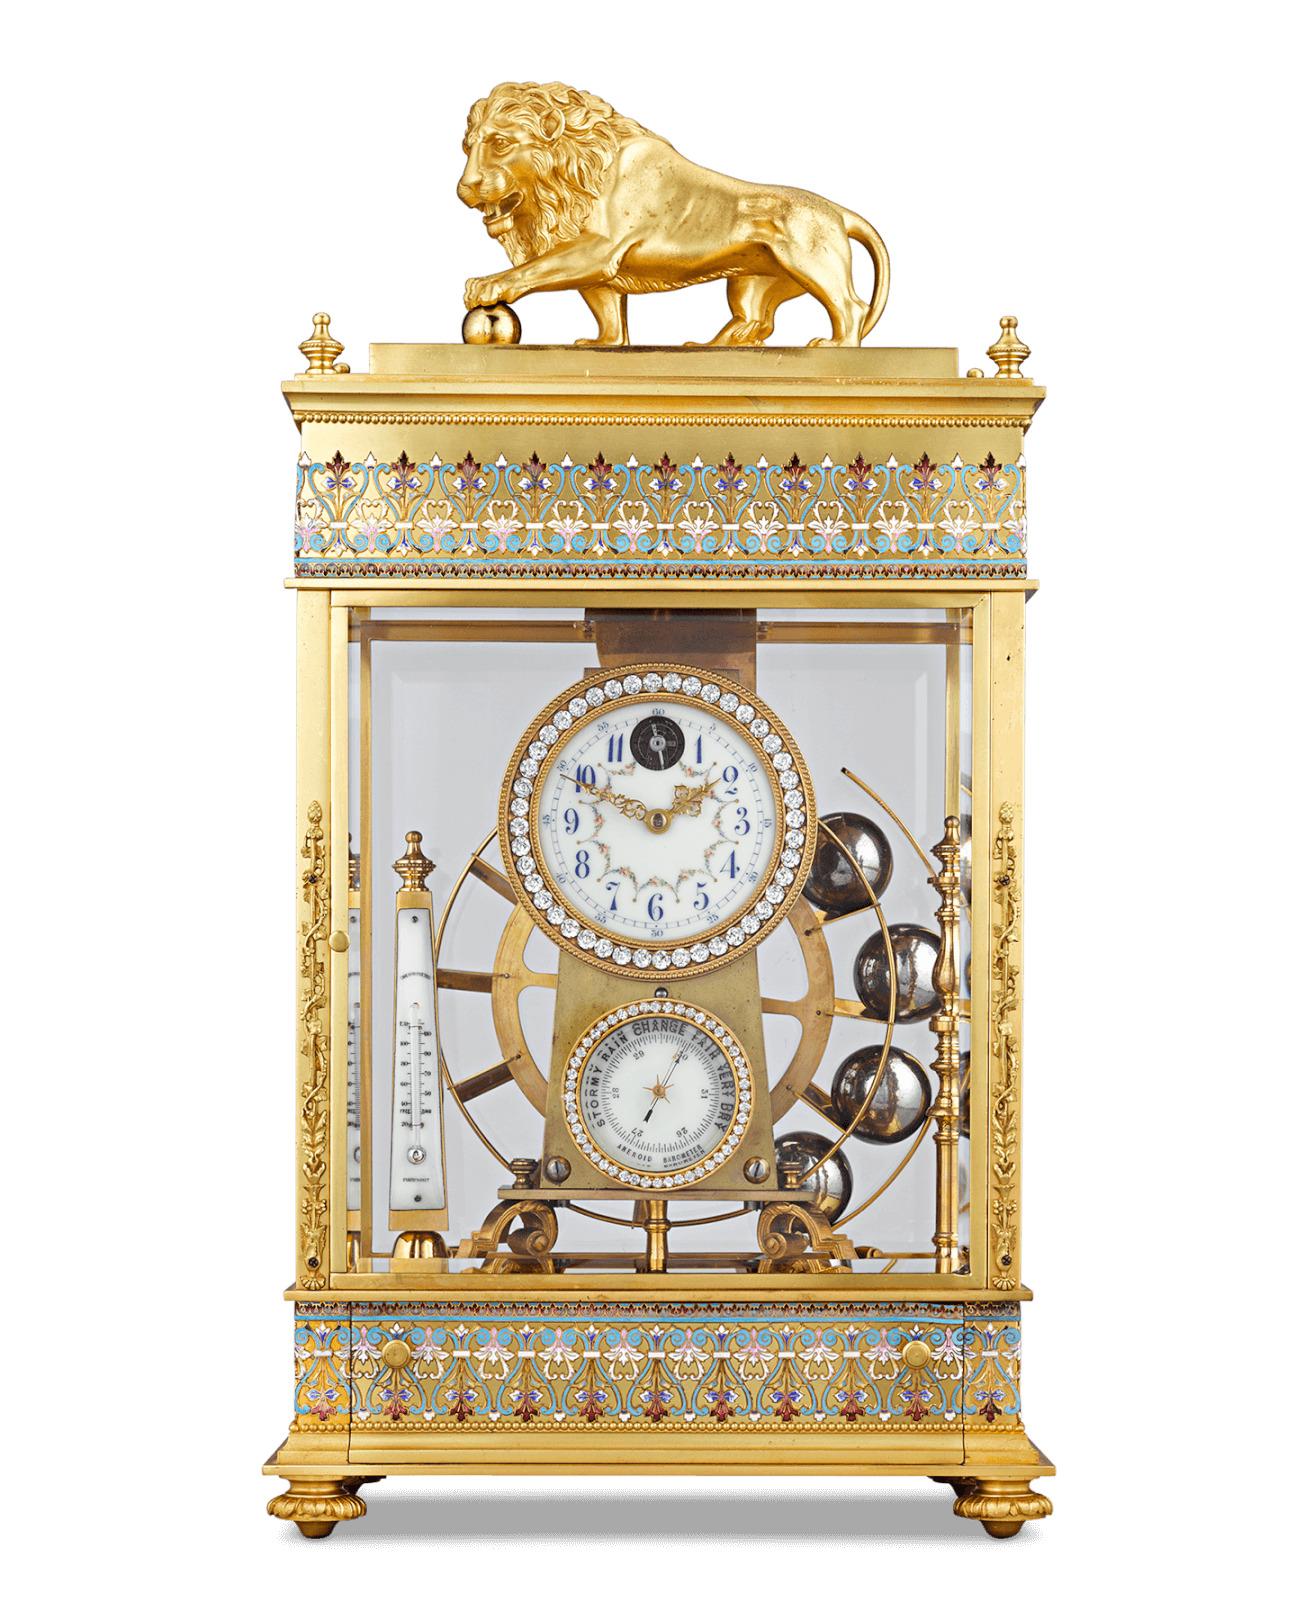 This French spherical weight mantel clock is as much a mechanical wonder as it is a work of art. Also known as a 